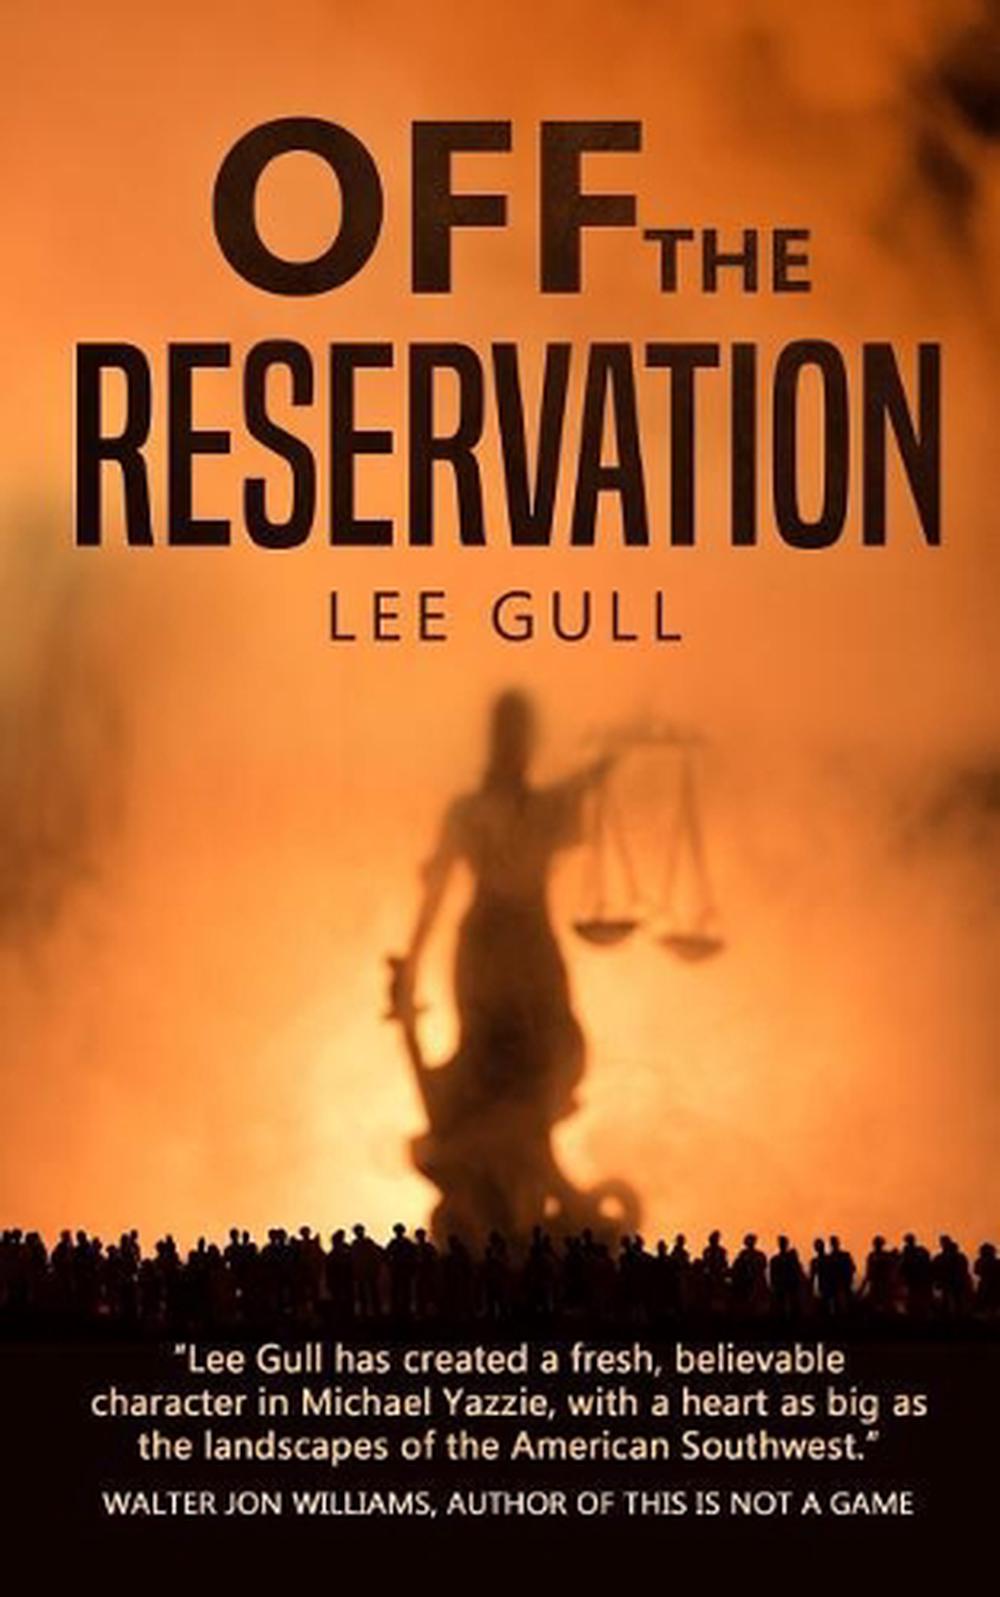 without reservations by jl langley